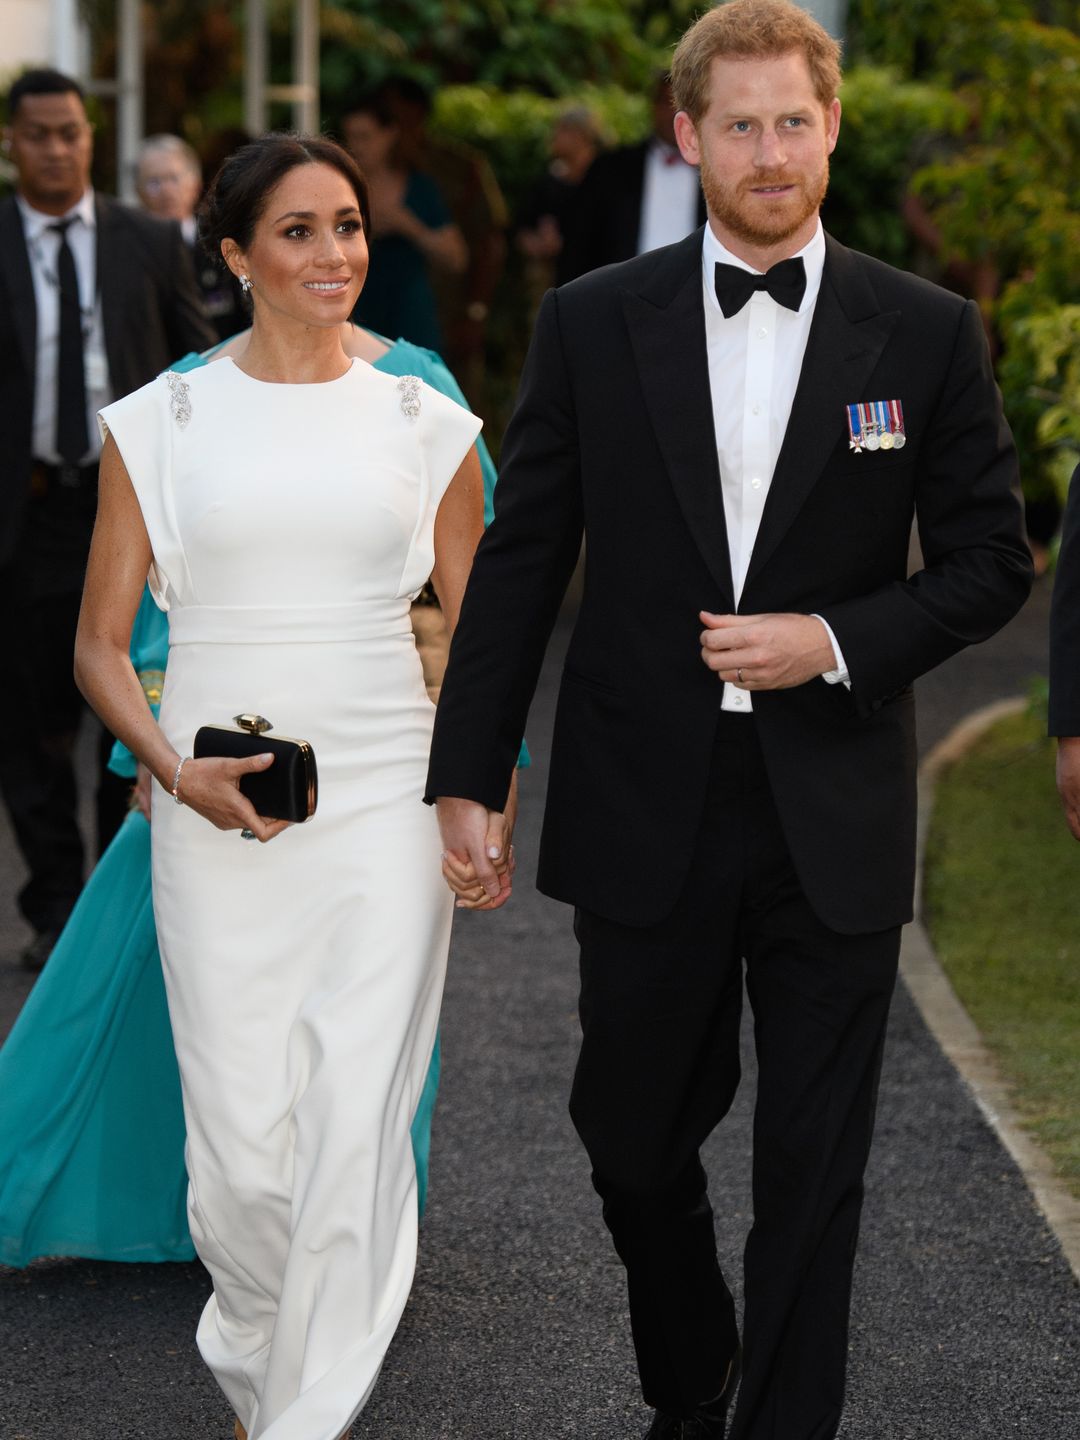 The Duchess of Sussex in a white dress holding hands with Prince Harry